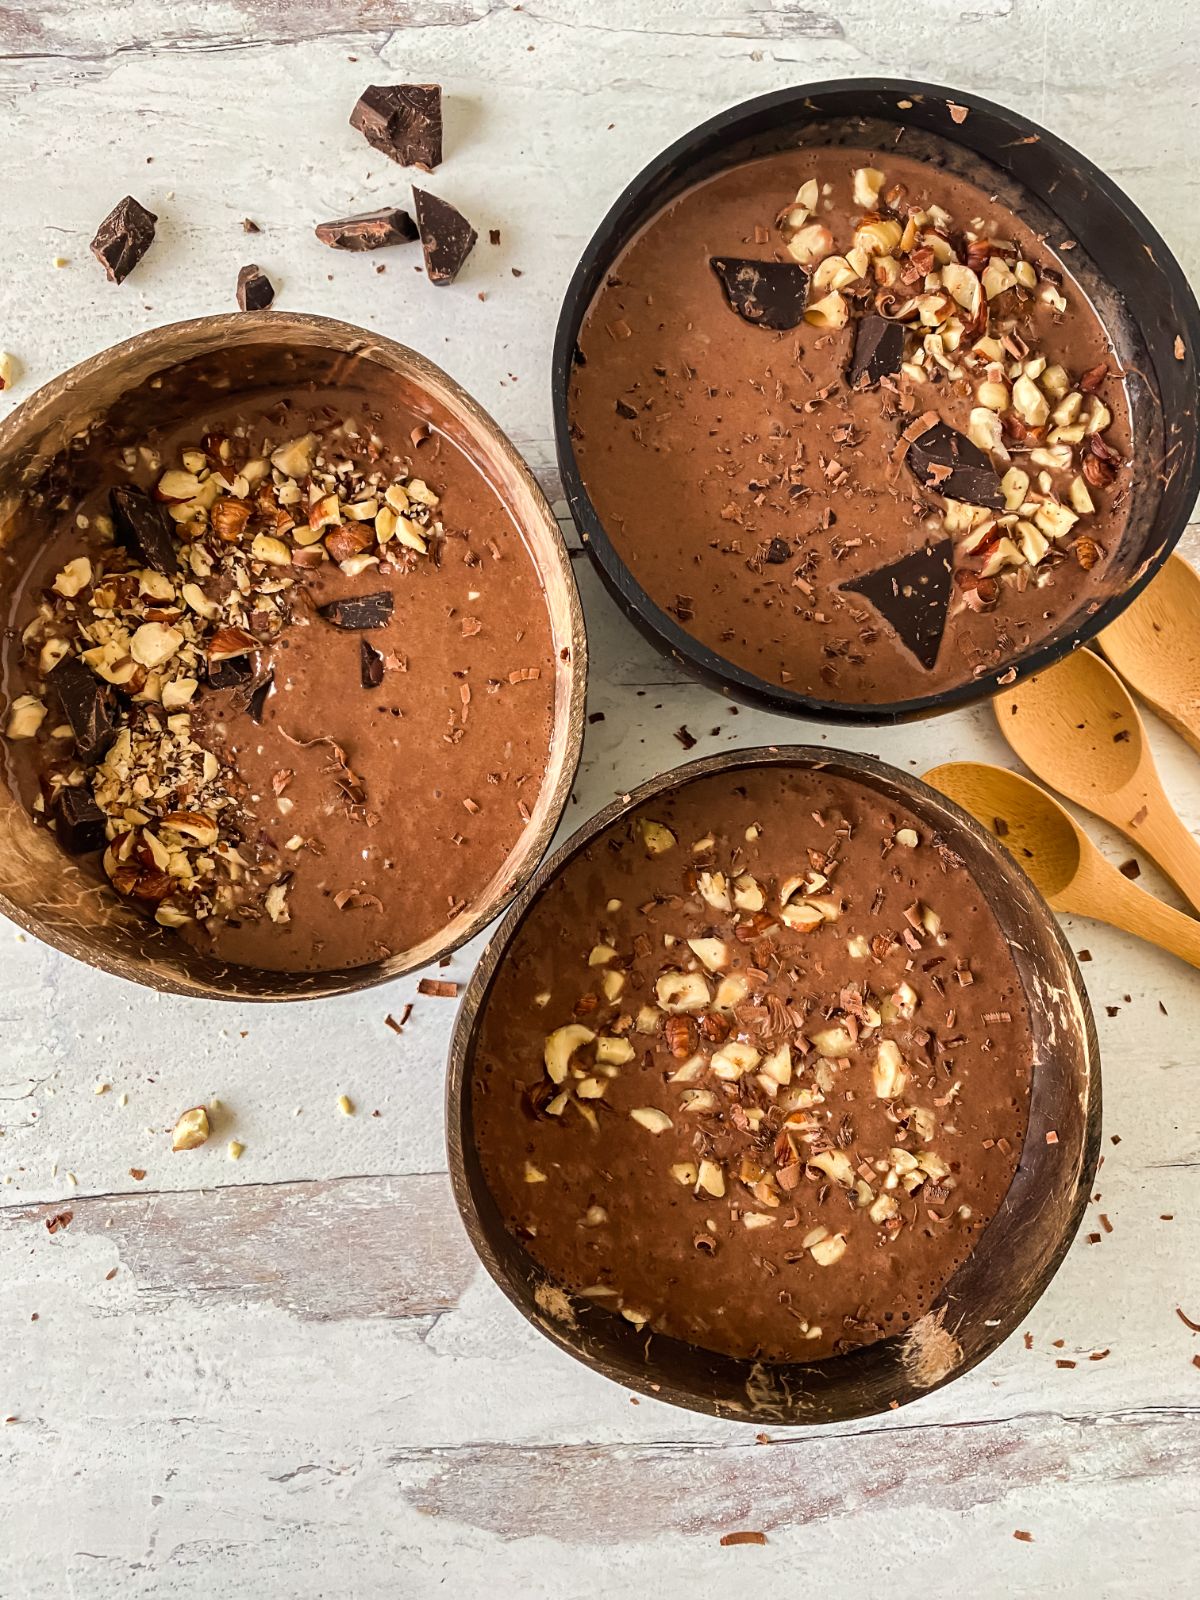 three large bowls filled with chocolate topped with hazelnuts on table